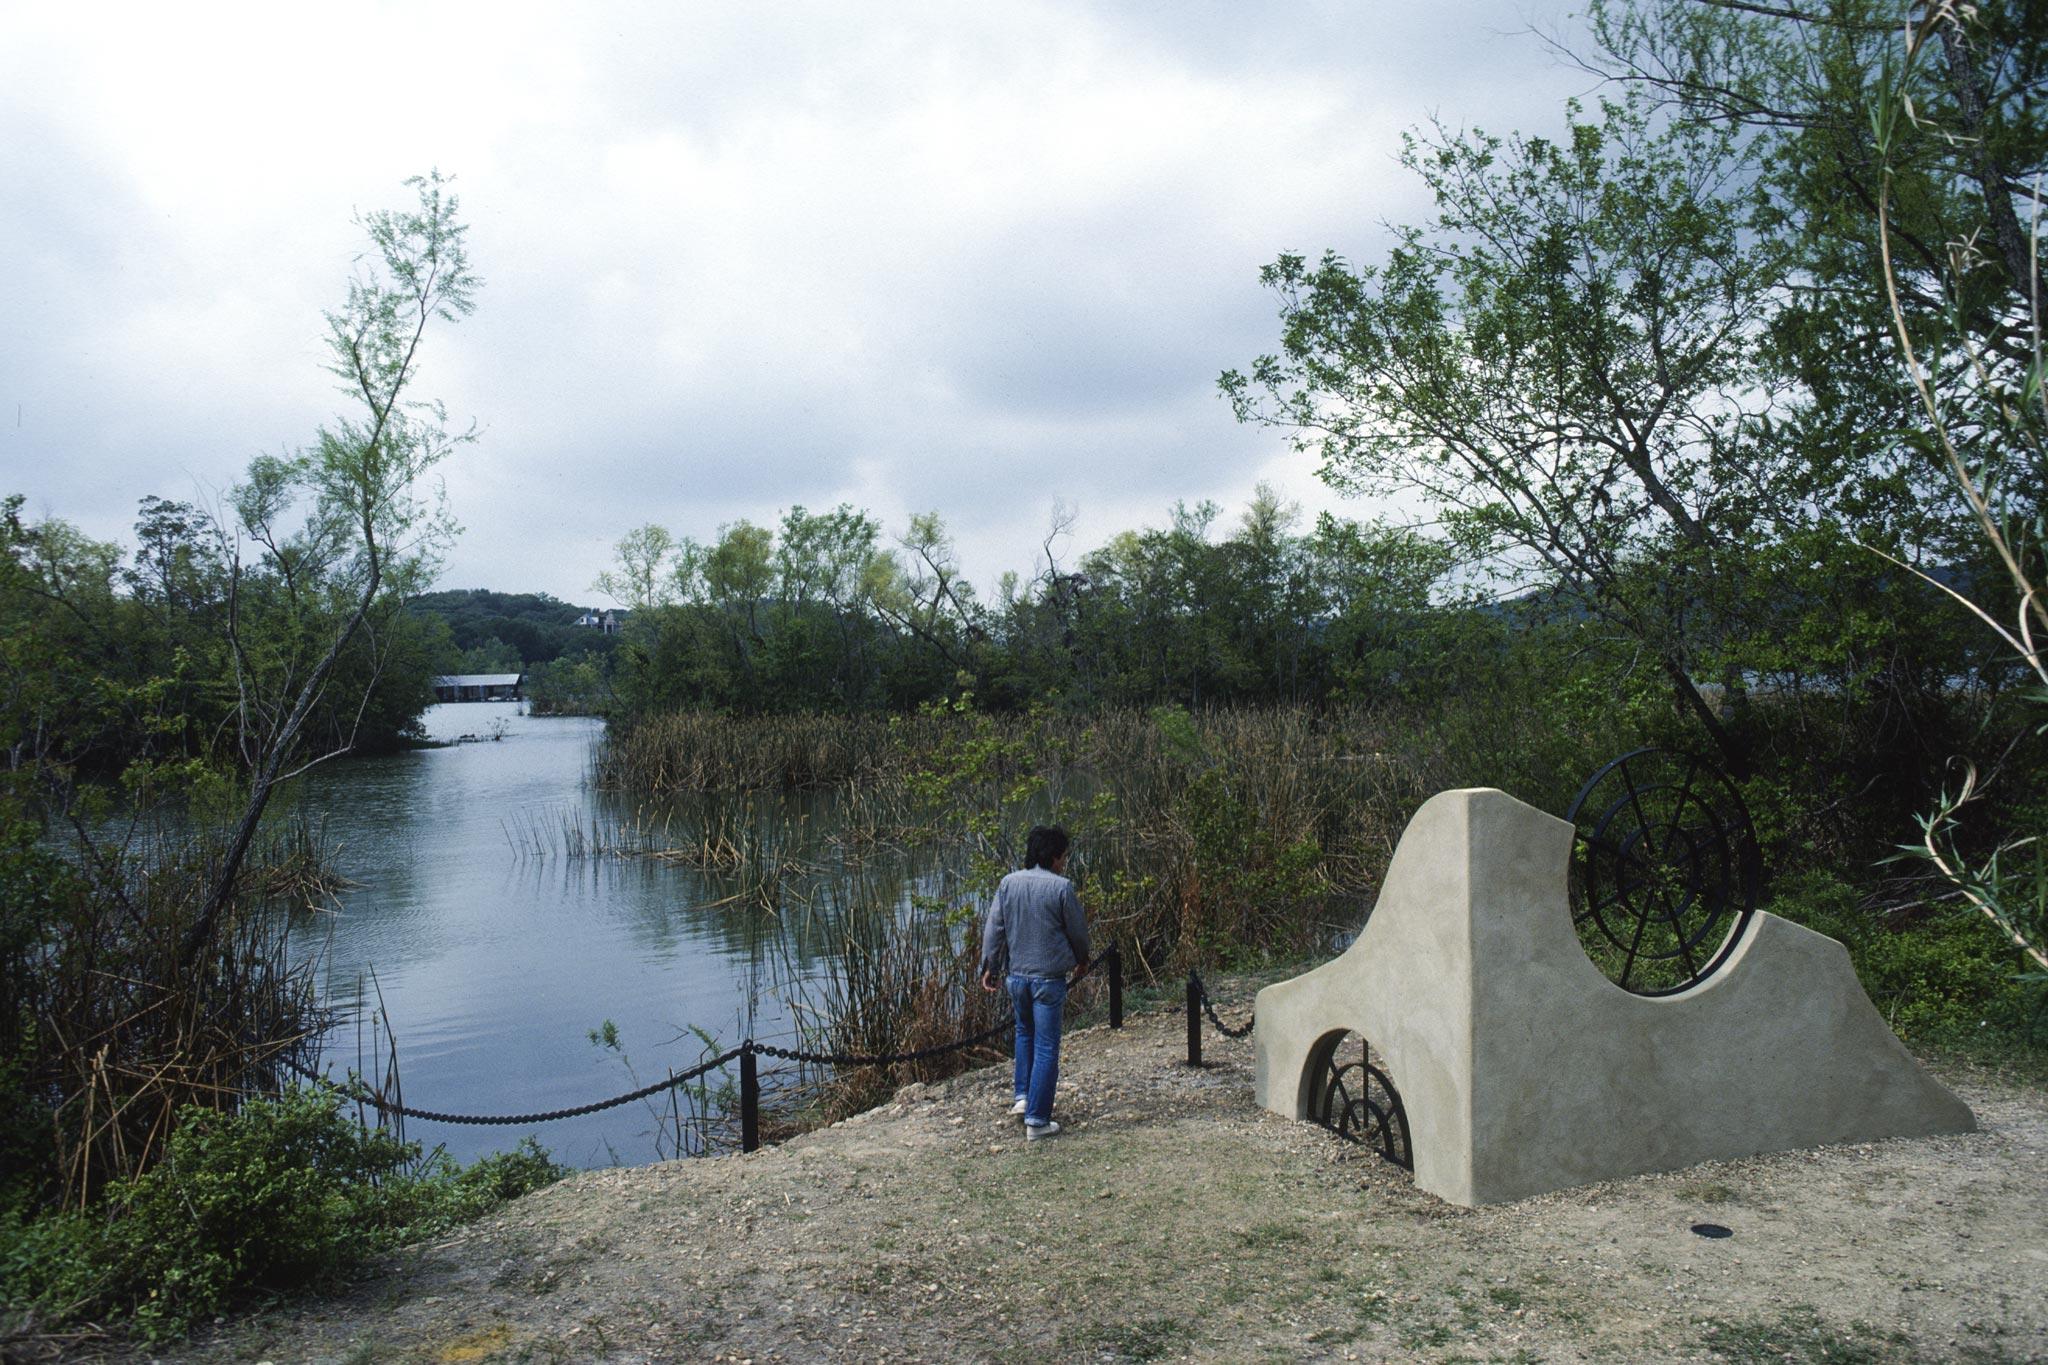 person stands next to a short undulating stucco wall with two round metal grates incorporated into the structure built on a lush lake shoreline